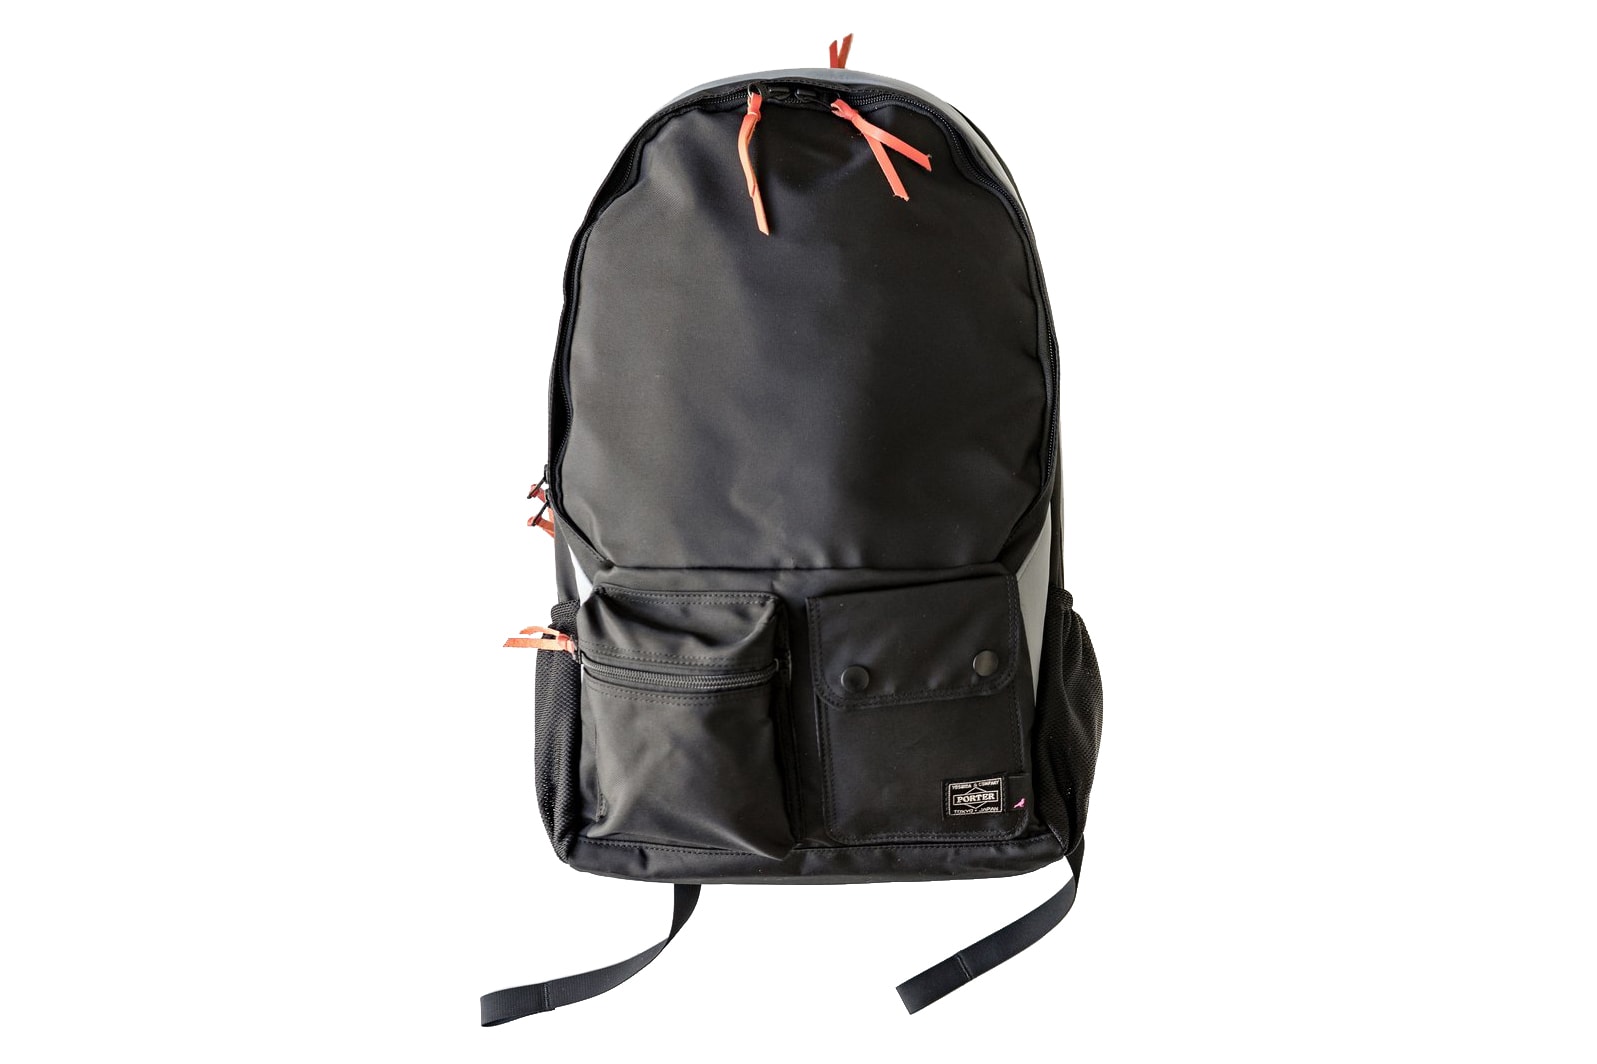 Staple Porter daypack backpack collaboration 20th anniversary jeff leather nylon pigeon brand twenty years two decades 550 usd laptop